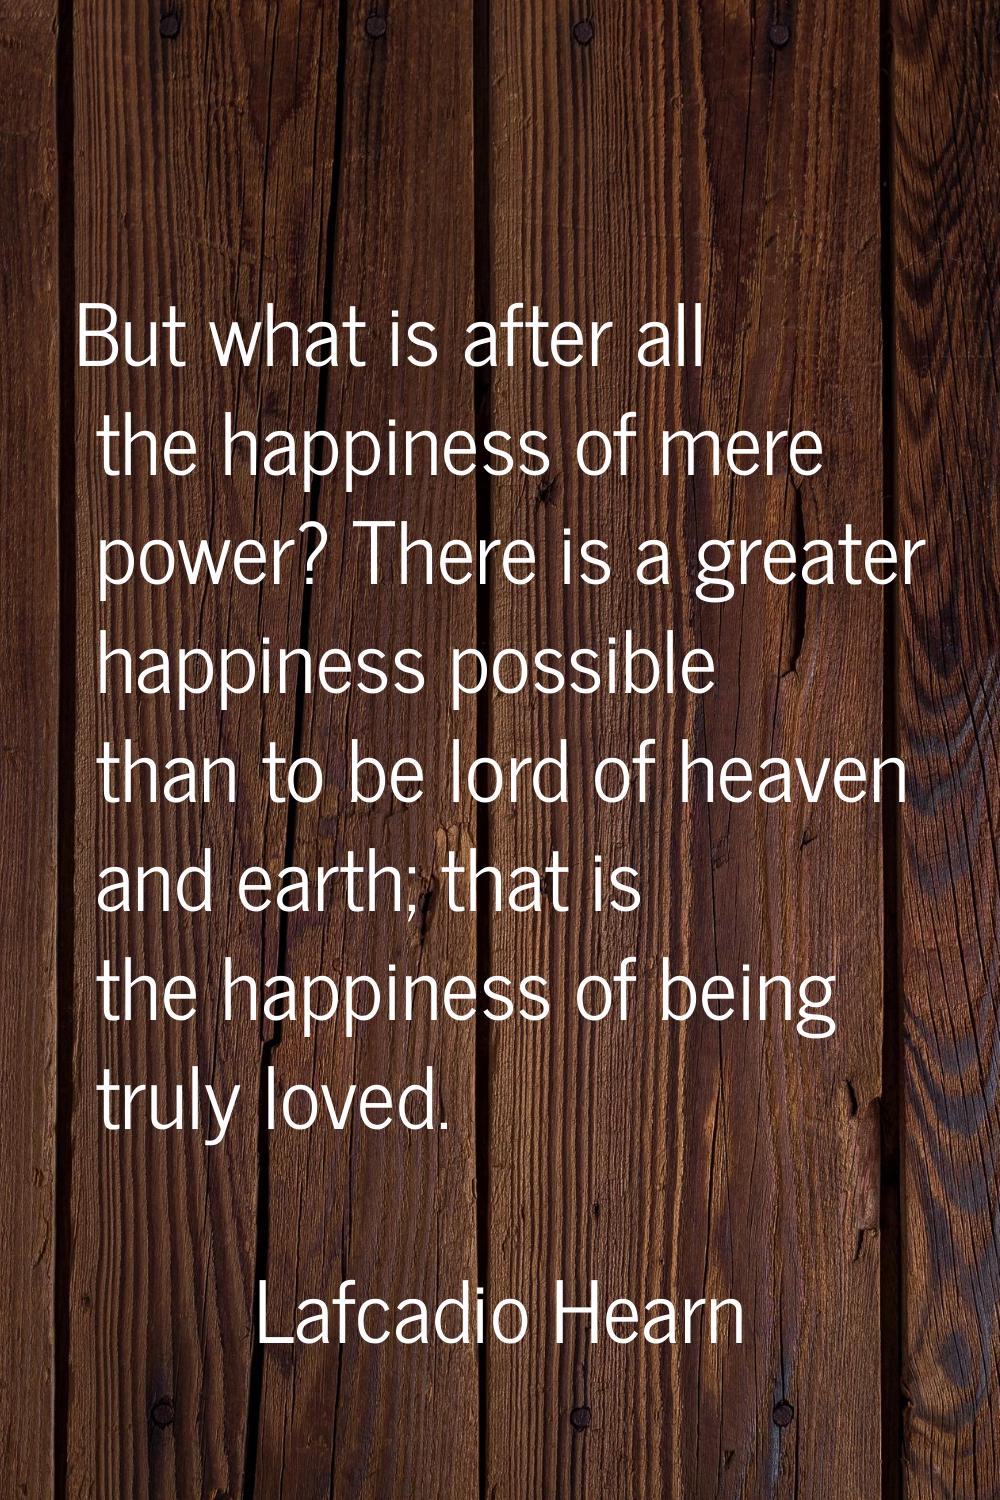 But what is after all the happiness of mere power? There is a greater happiness possible than to be